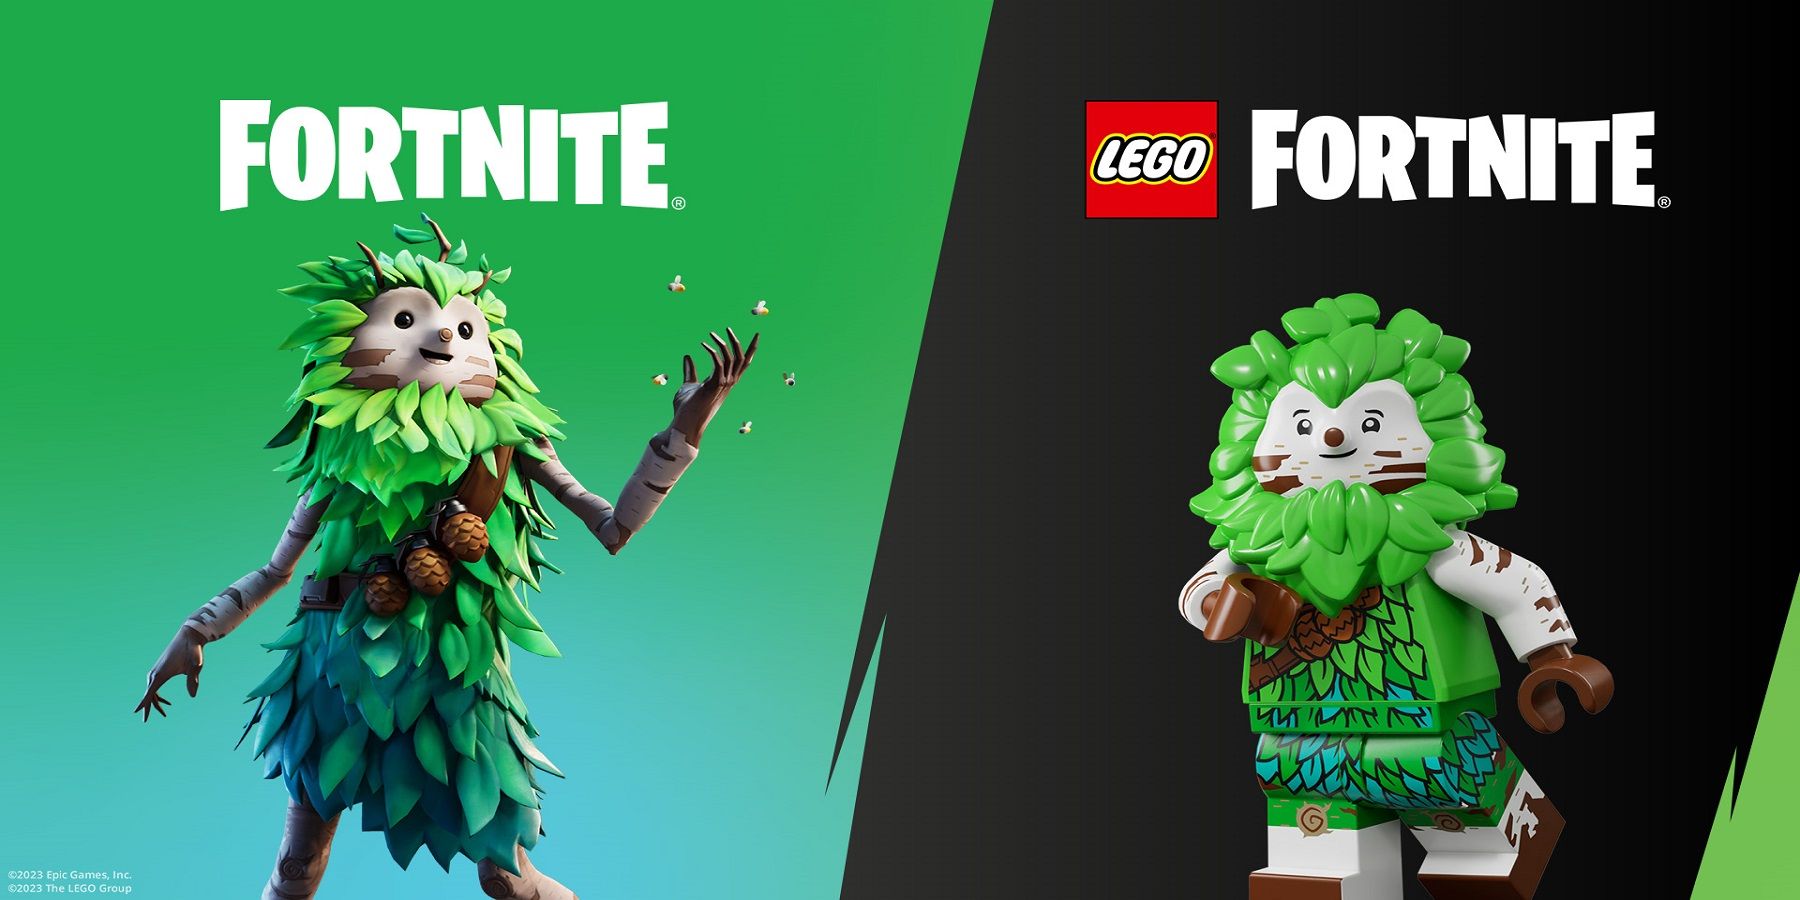 the lego version of a fortnite skin